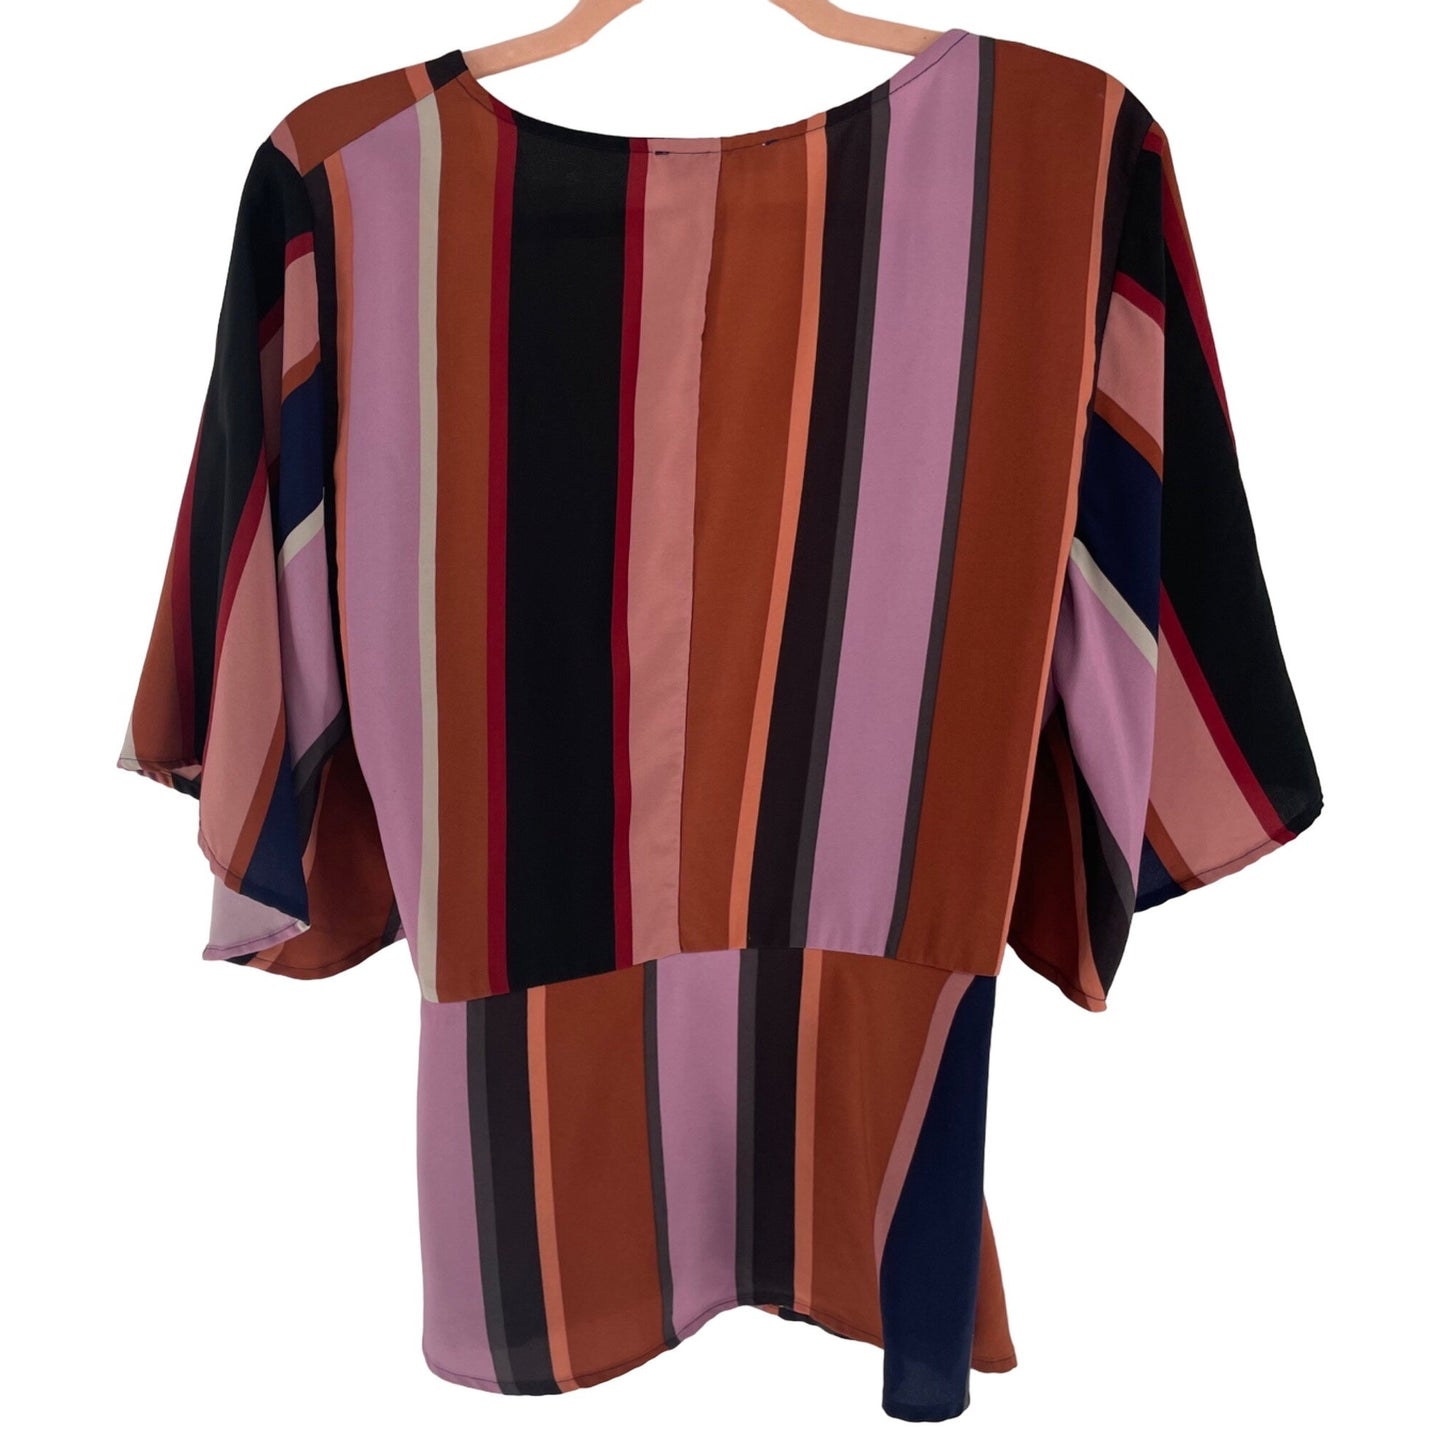 Louna Women's Size Large Multi-Colored V-Neck Striped Bell Sleeve Wrap Top